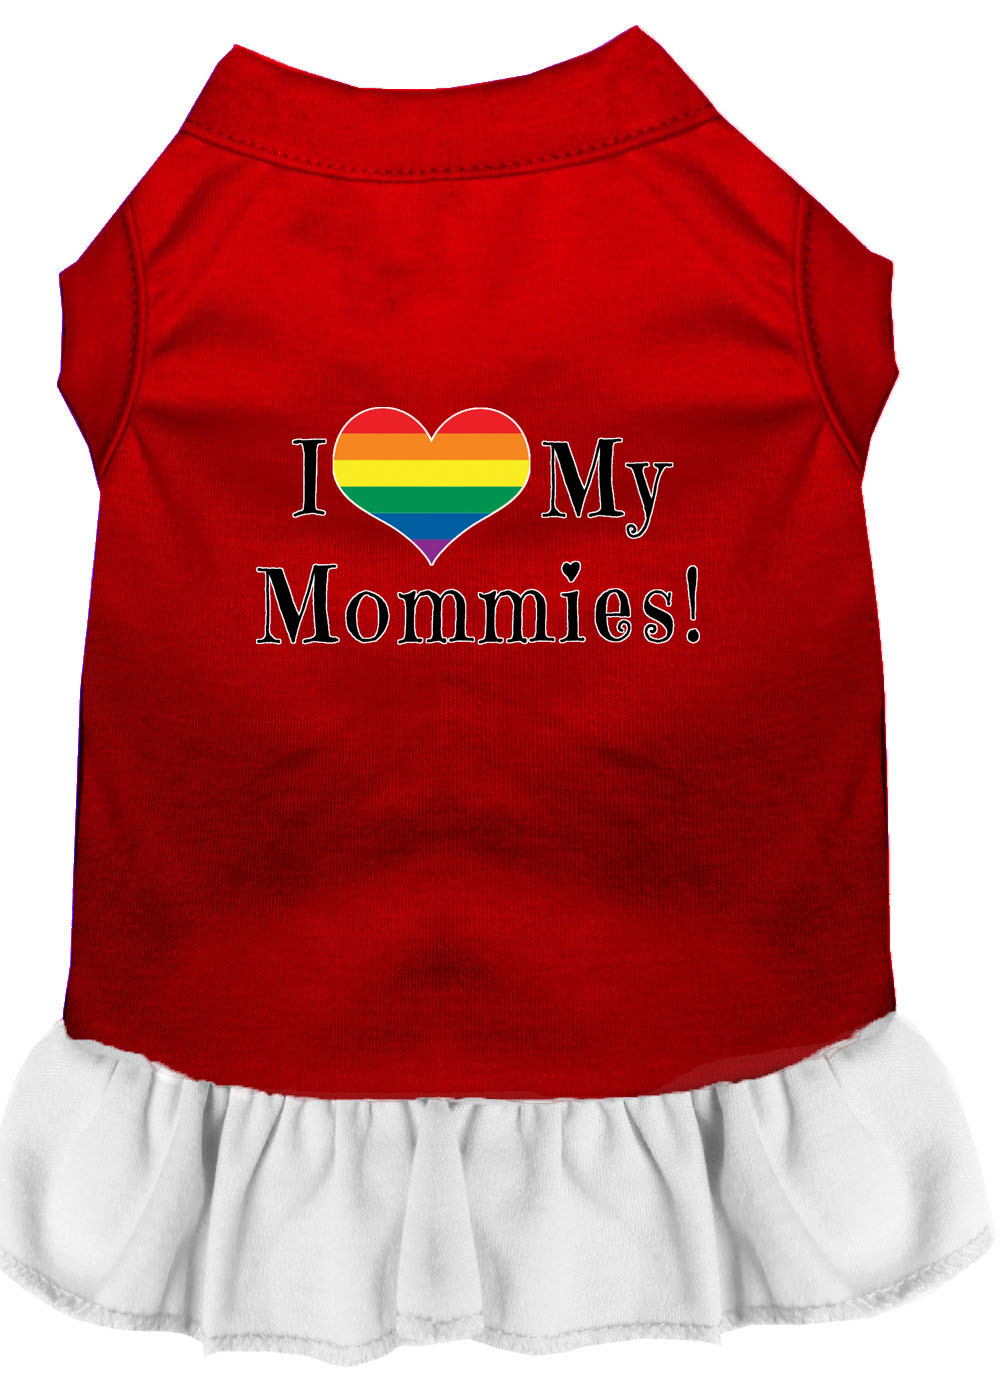 I Heart my Mommies Screen Print Dog Dress Red with White Lg